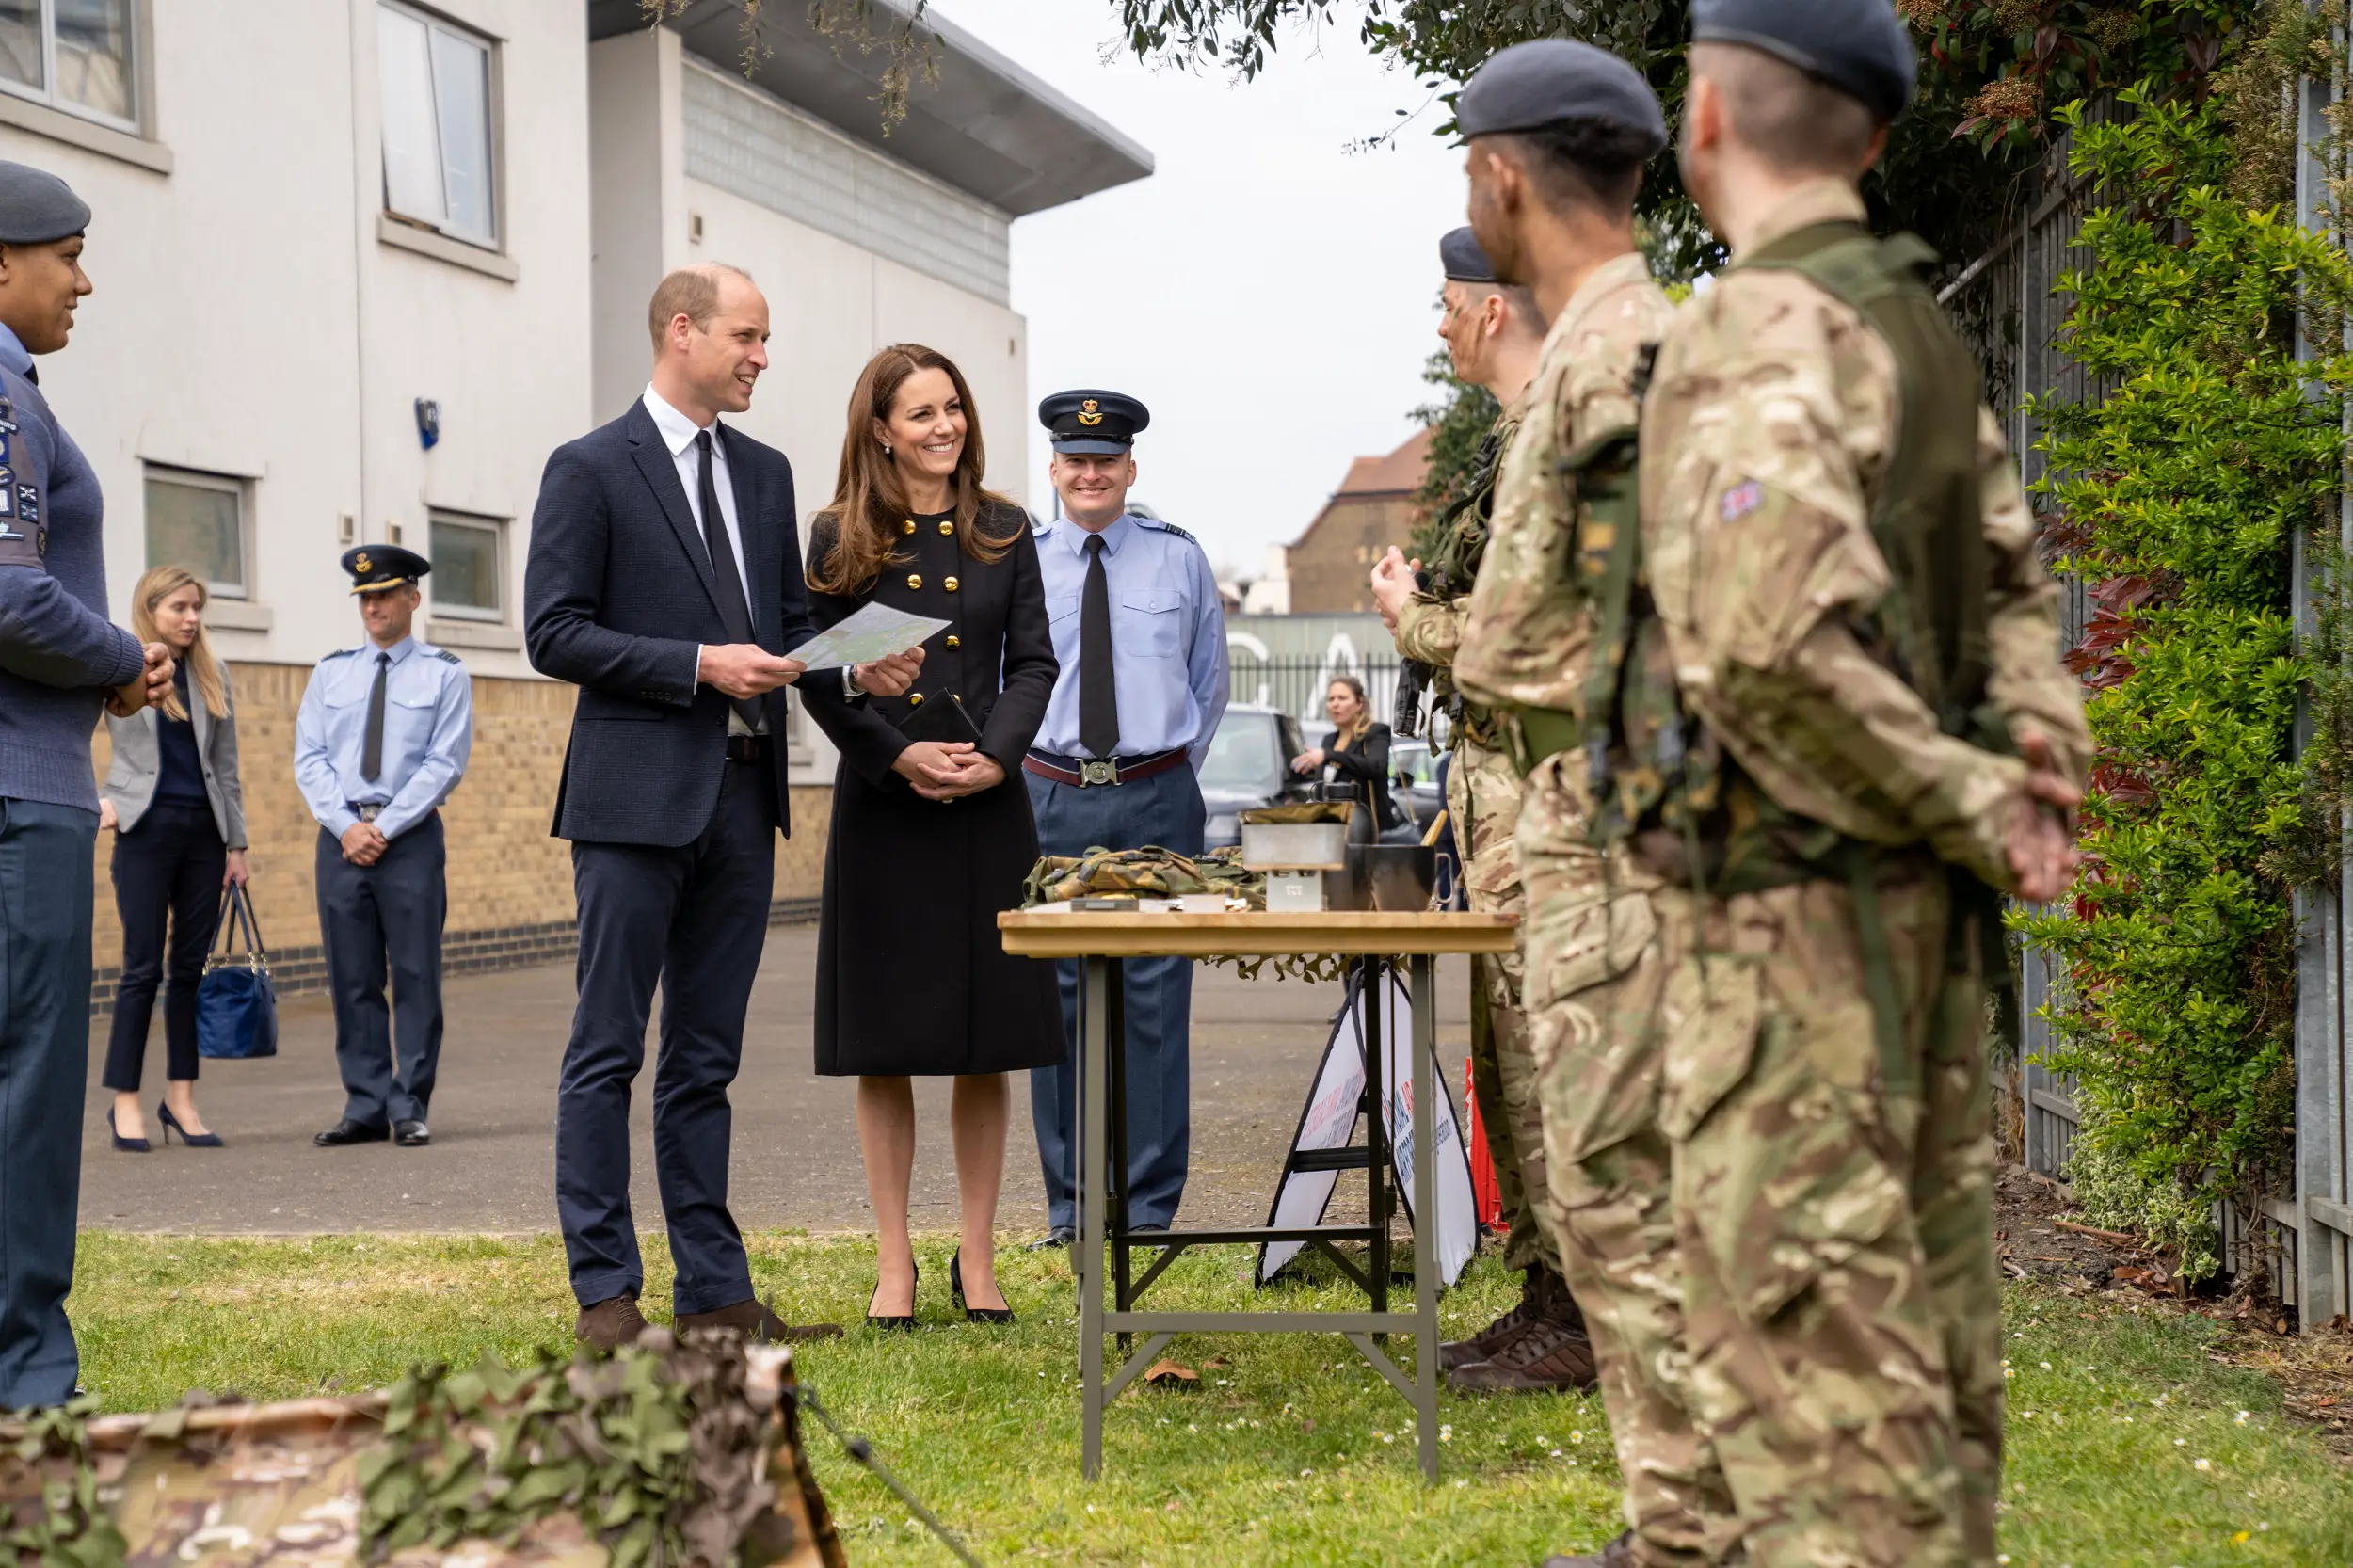 The Duke and Duchess of Cambridge visited Air Cadets in London